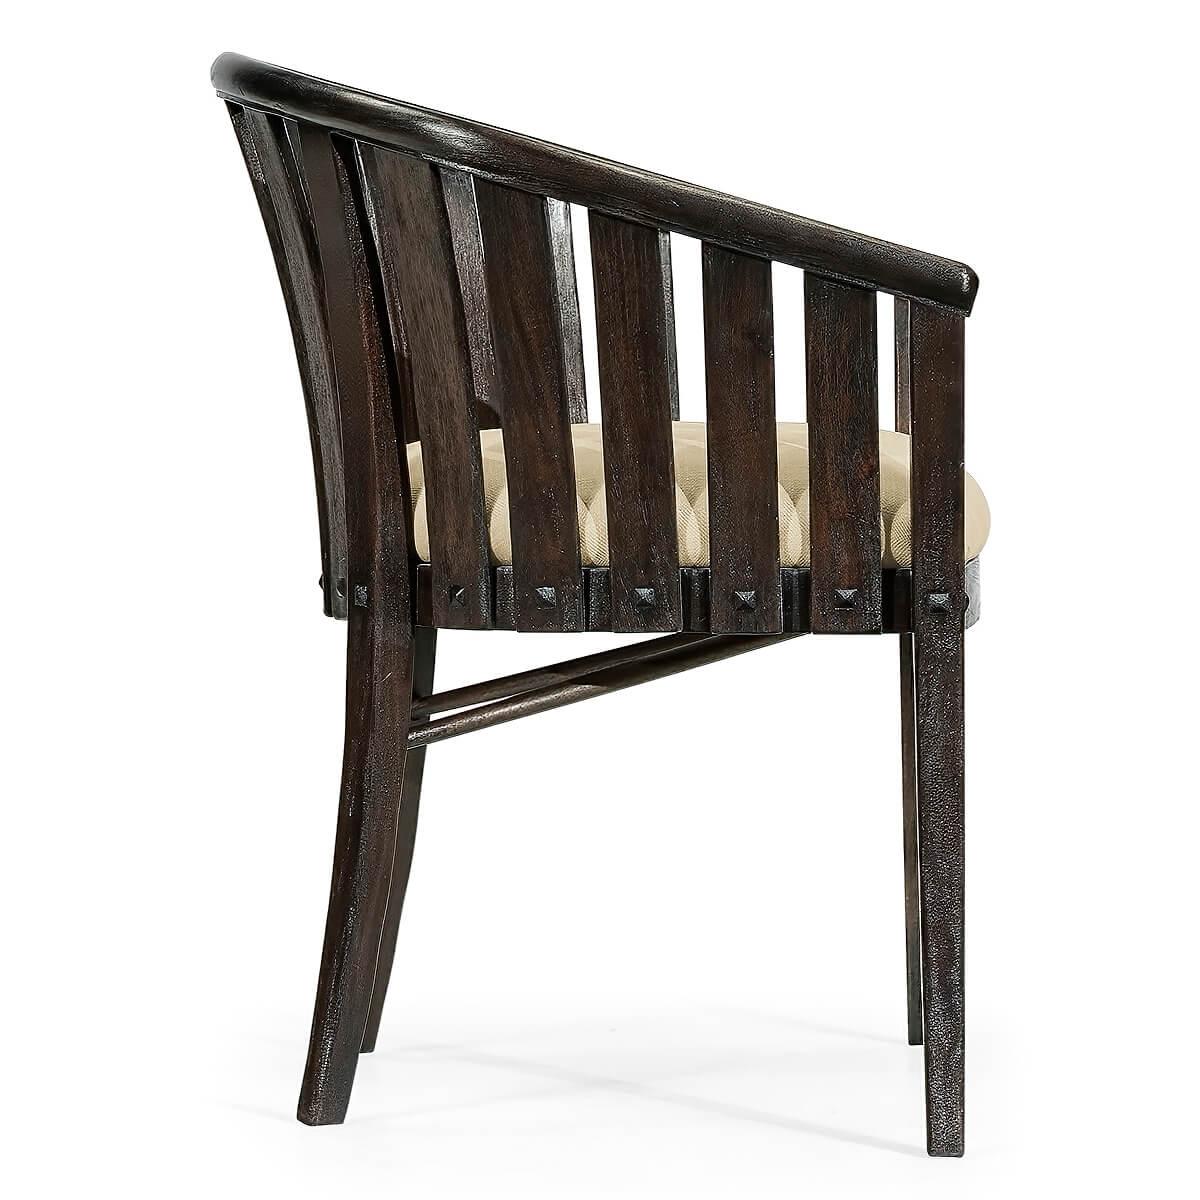 An Irish Country style barrel back tub chair with slatted backrest and cushioned seat above out flaring legs and finished in our Dark Ale (pub) color.

Dimensions: 27.25